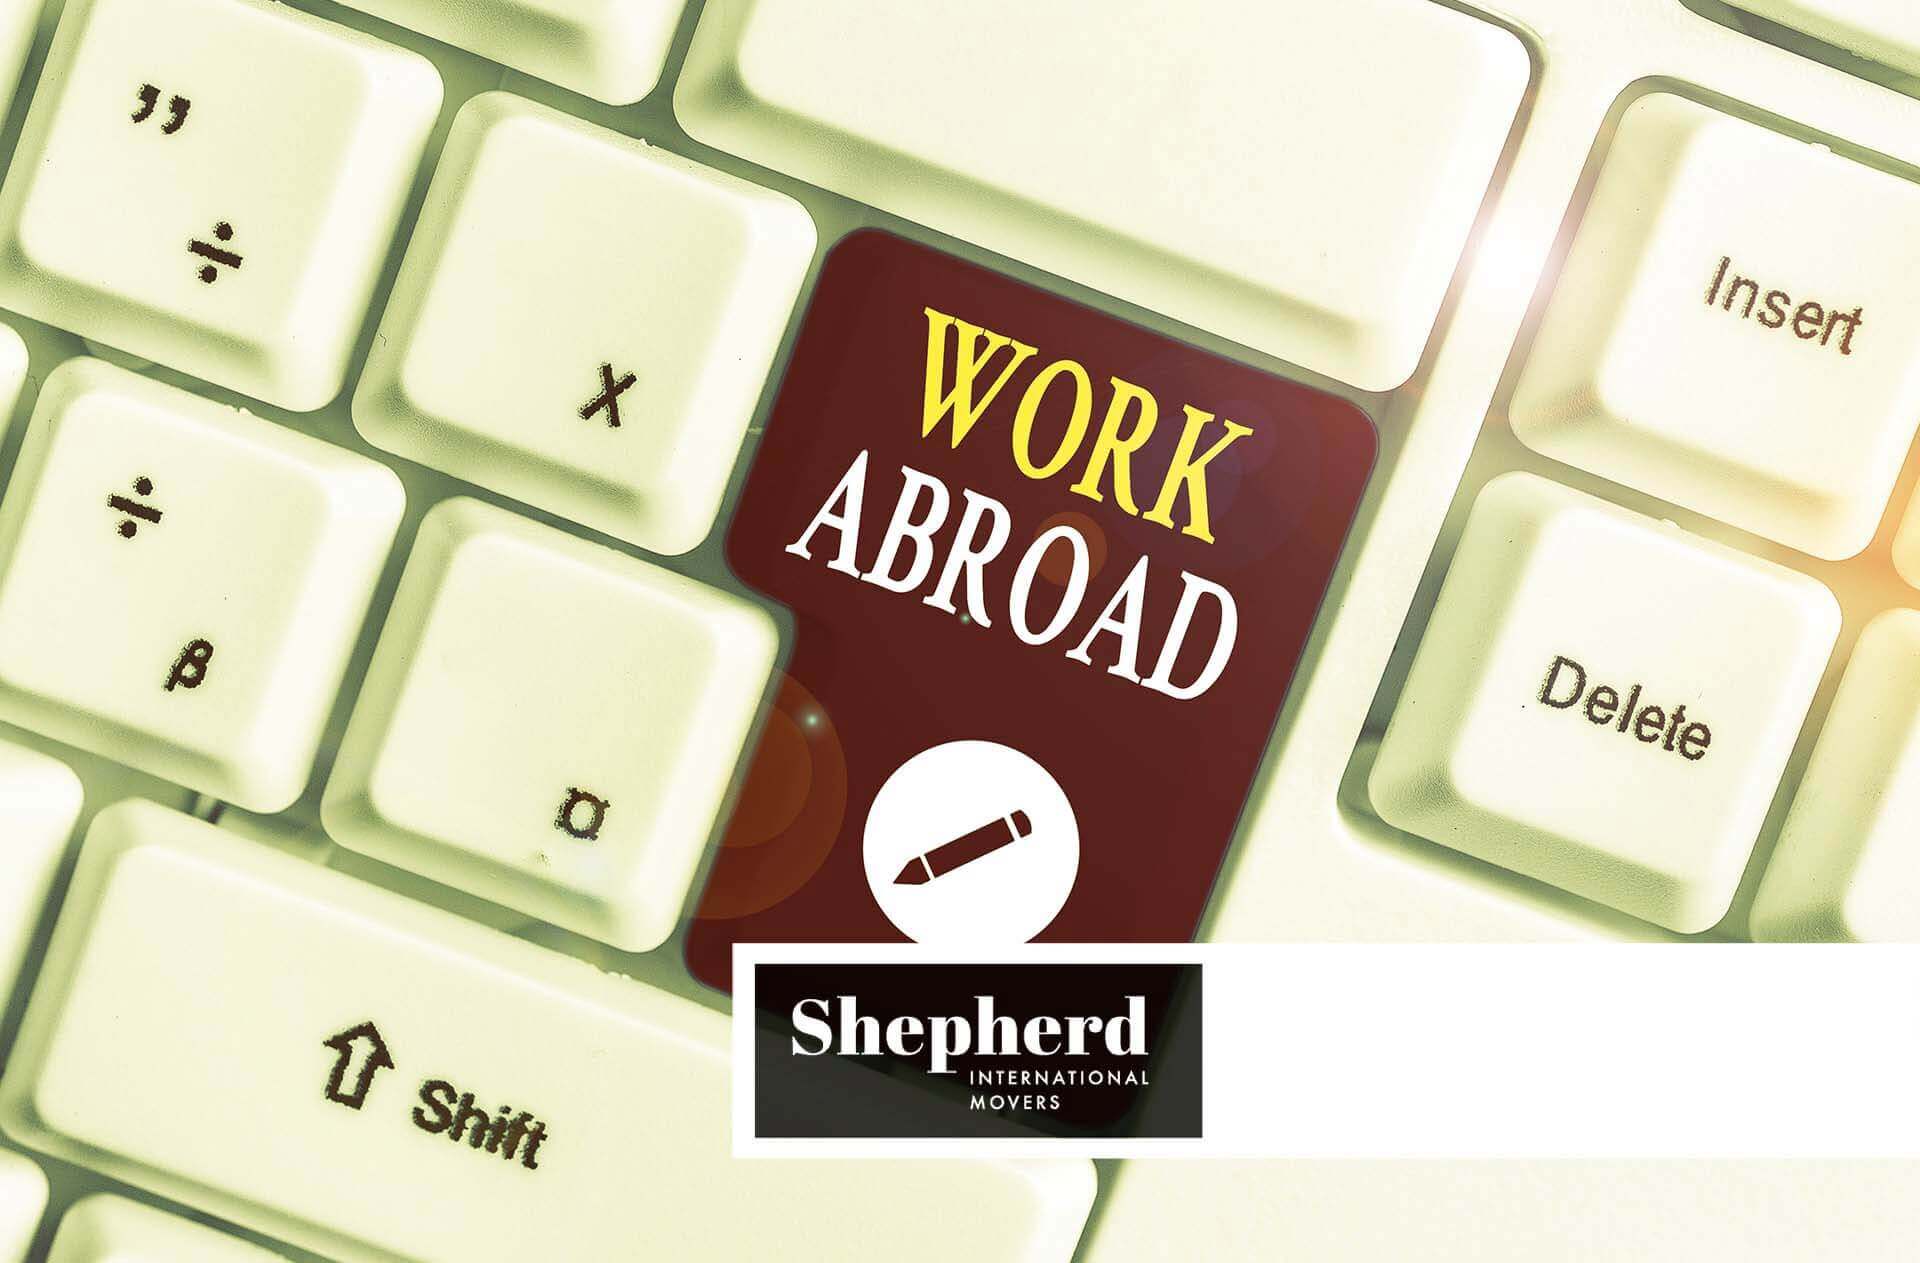 Work abroad button on a keyboard